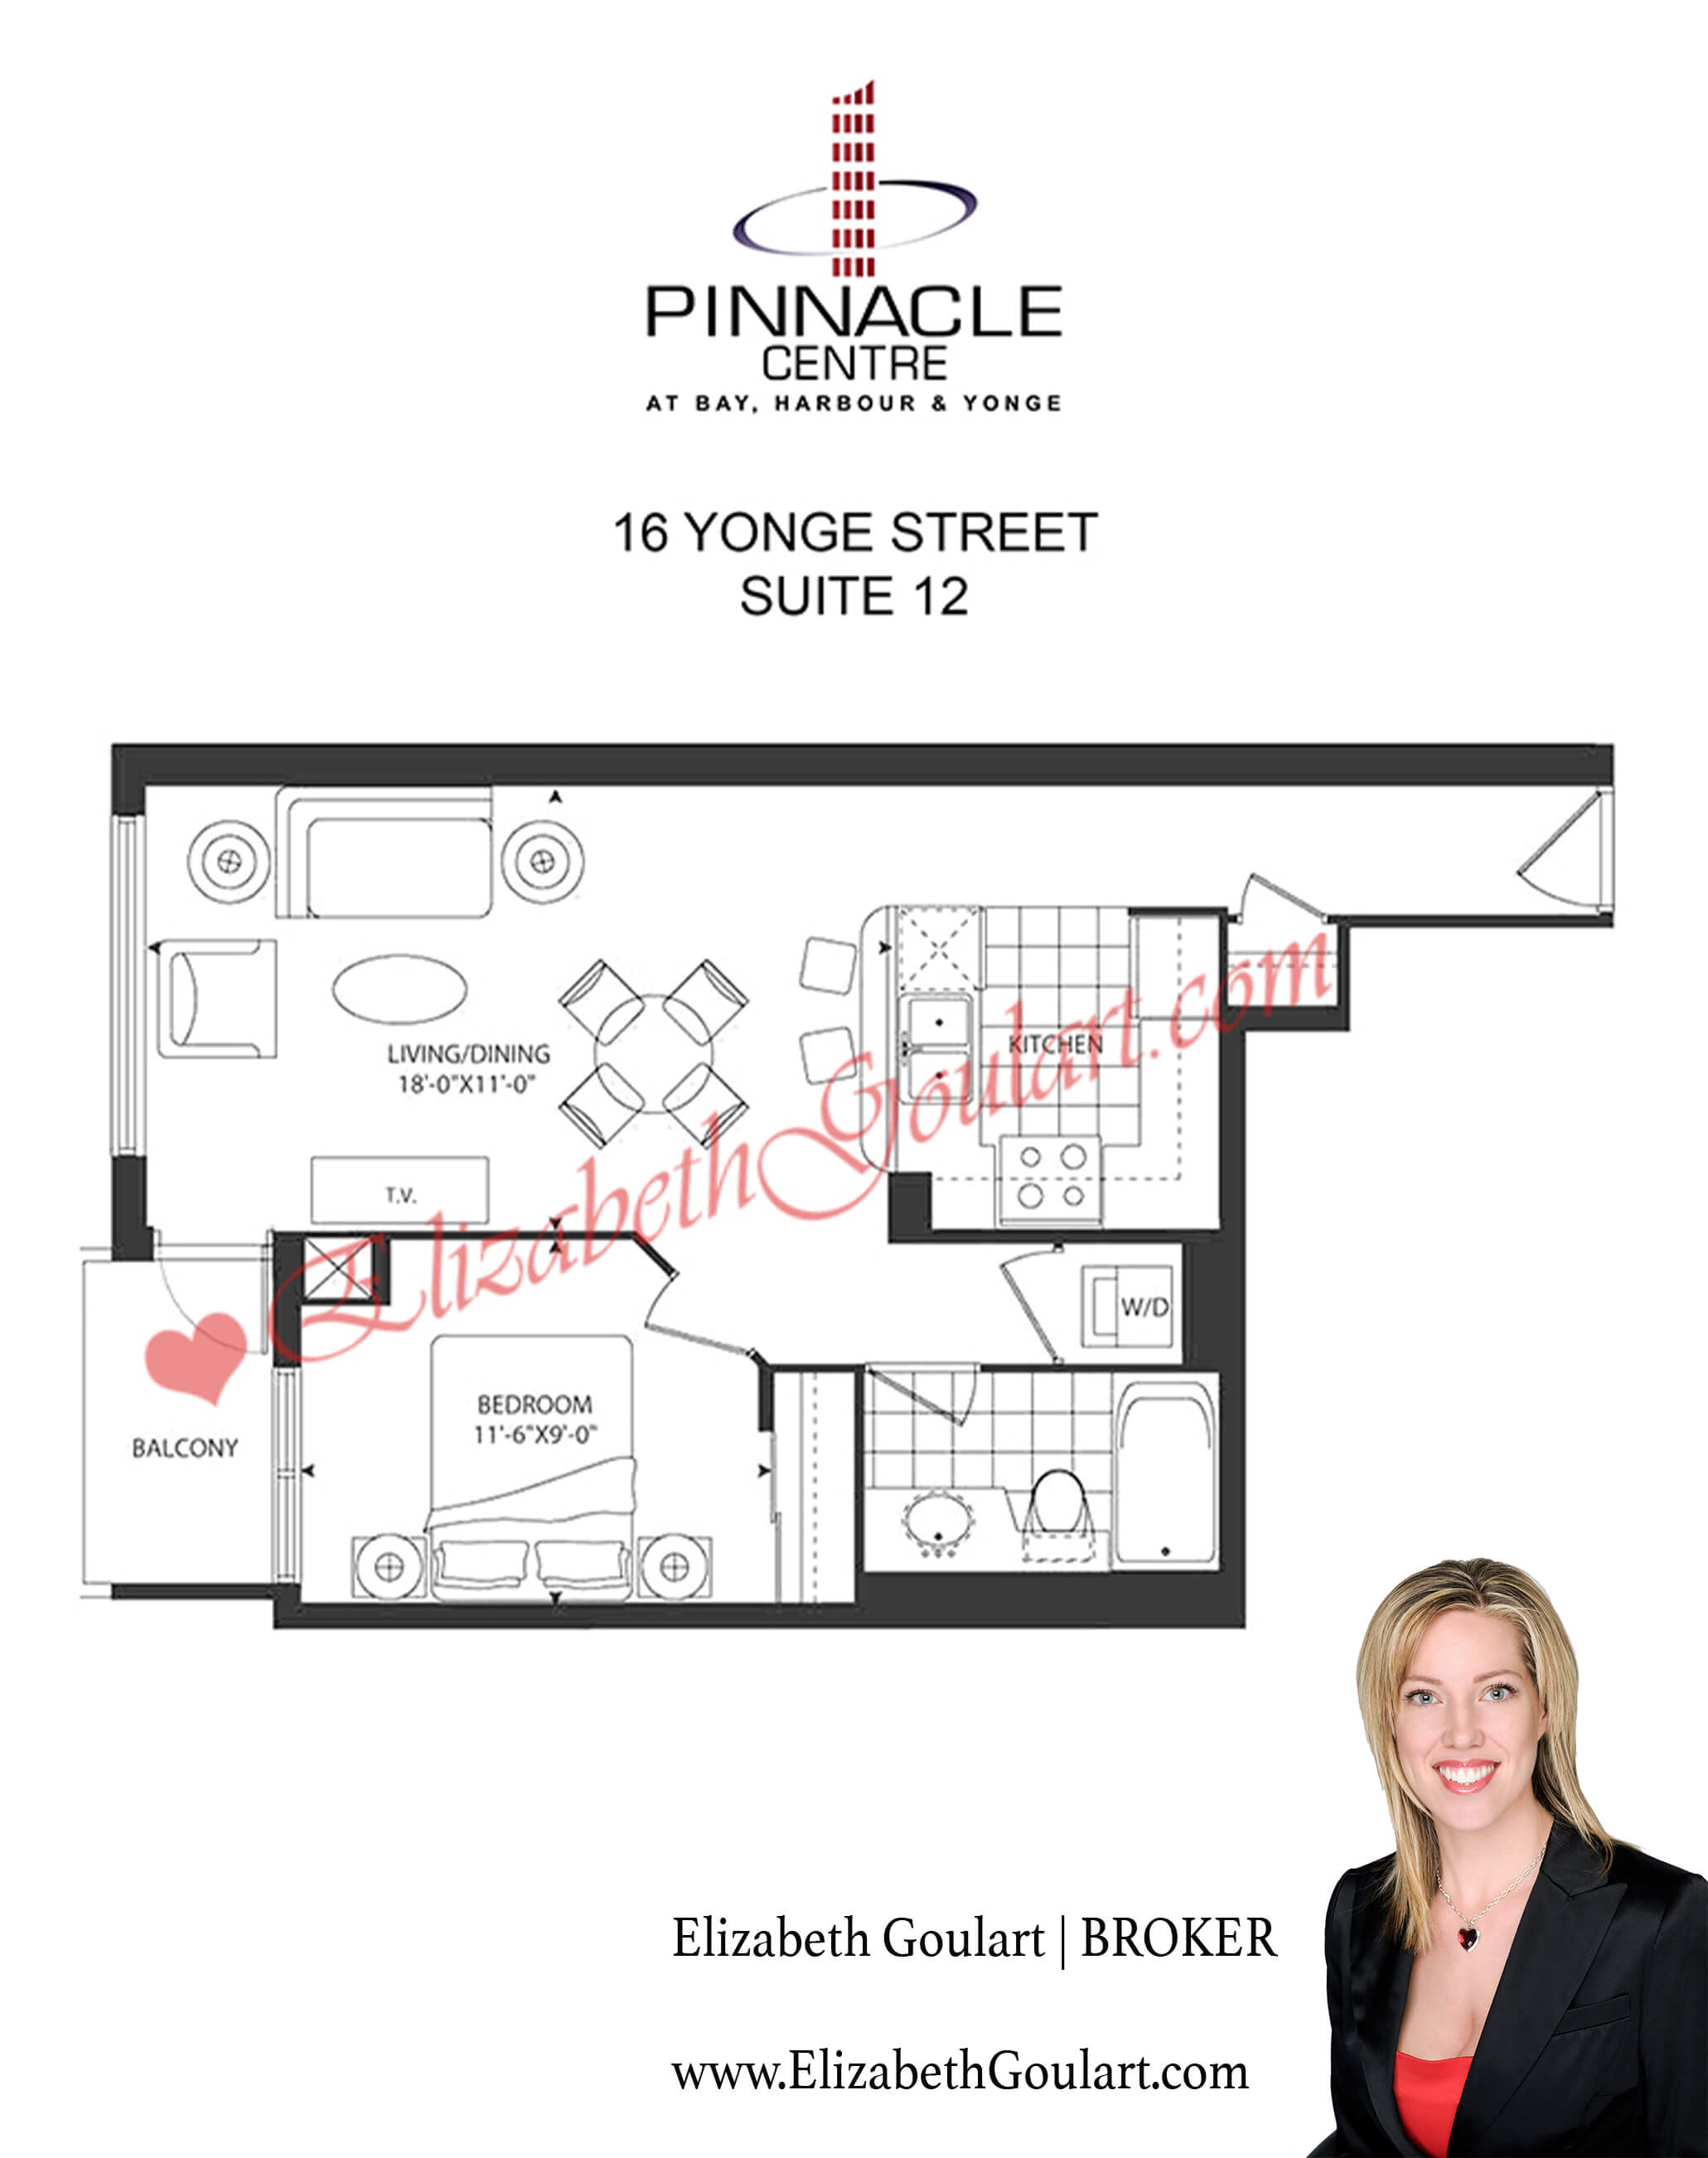 16 Yonge Street Pinnacle Centre Condos For Sale / Rent